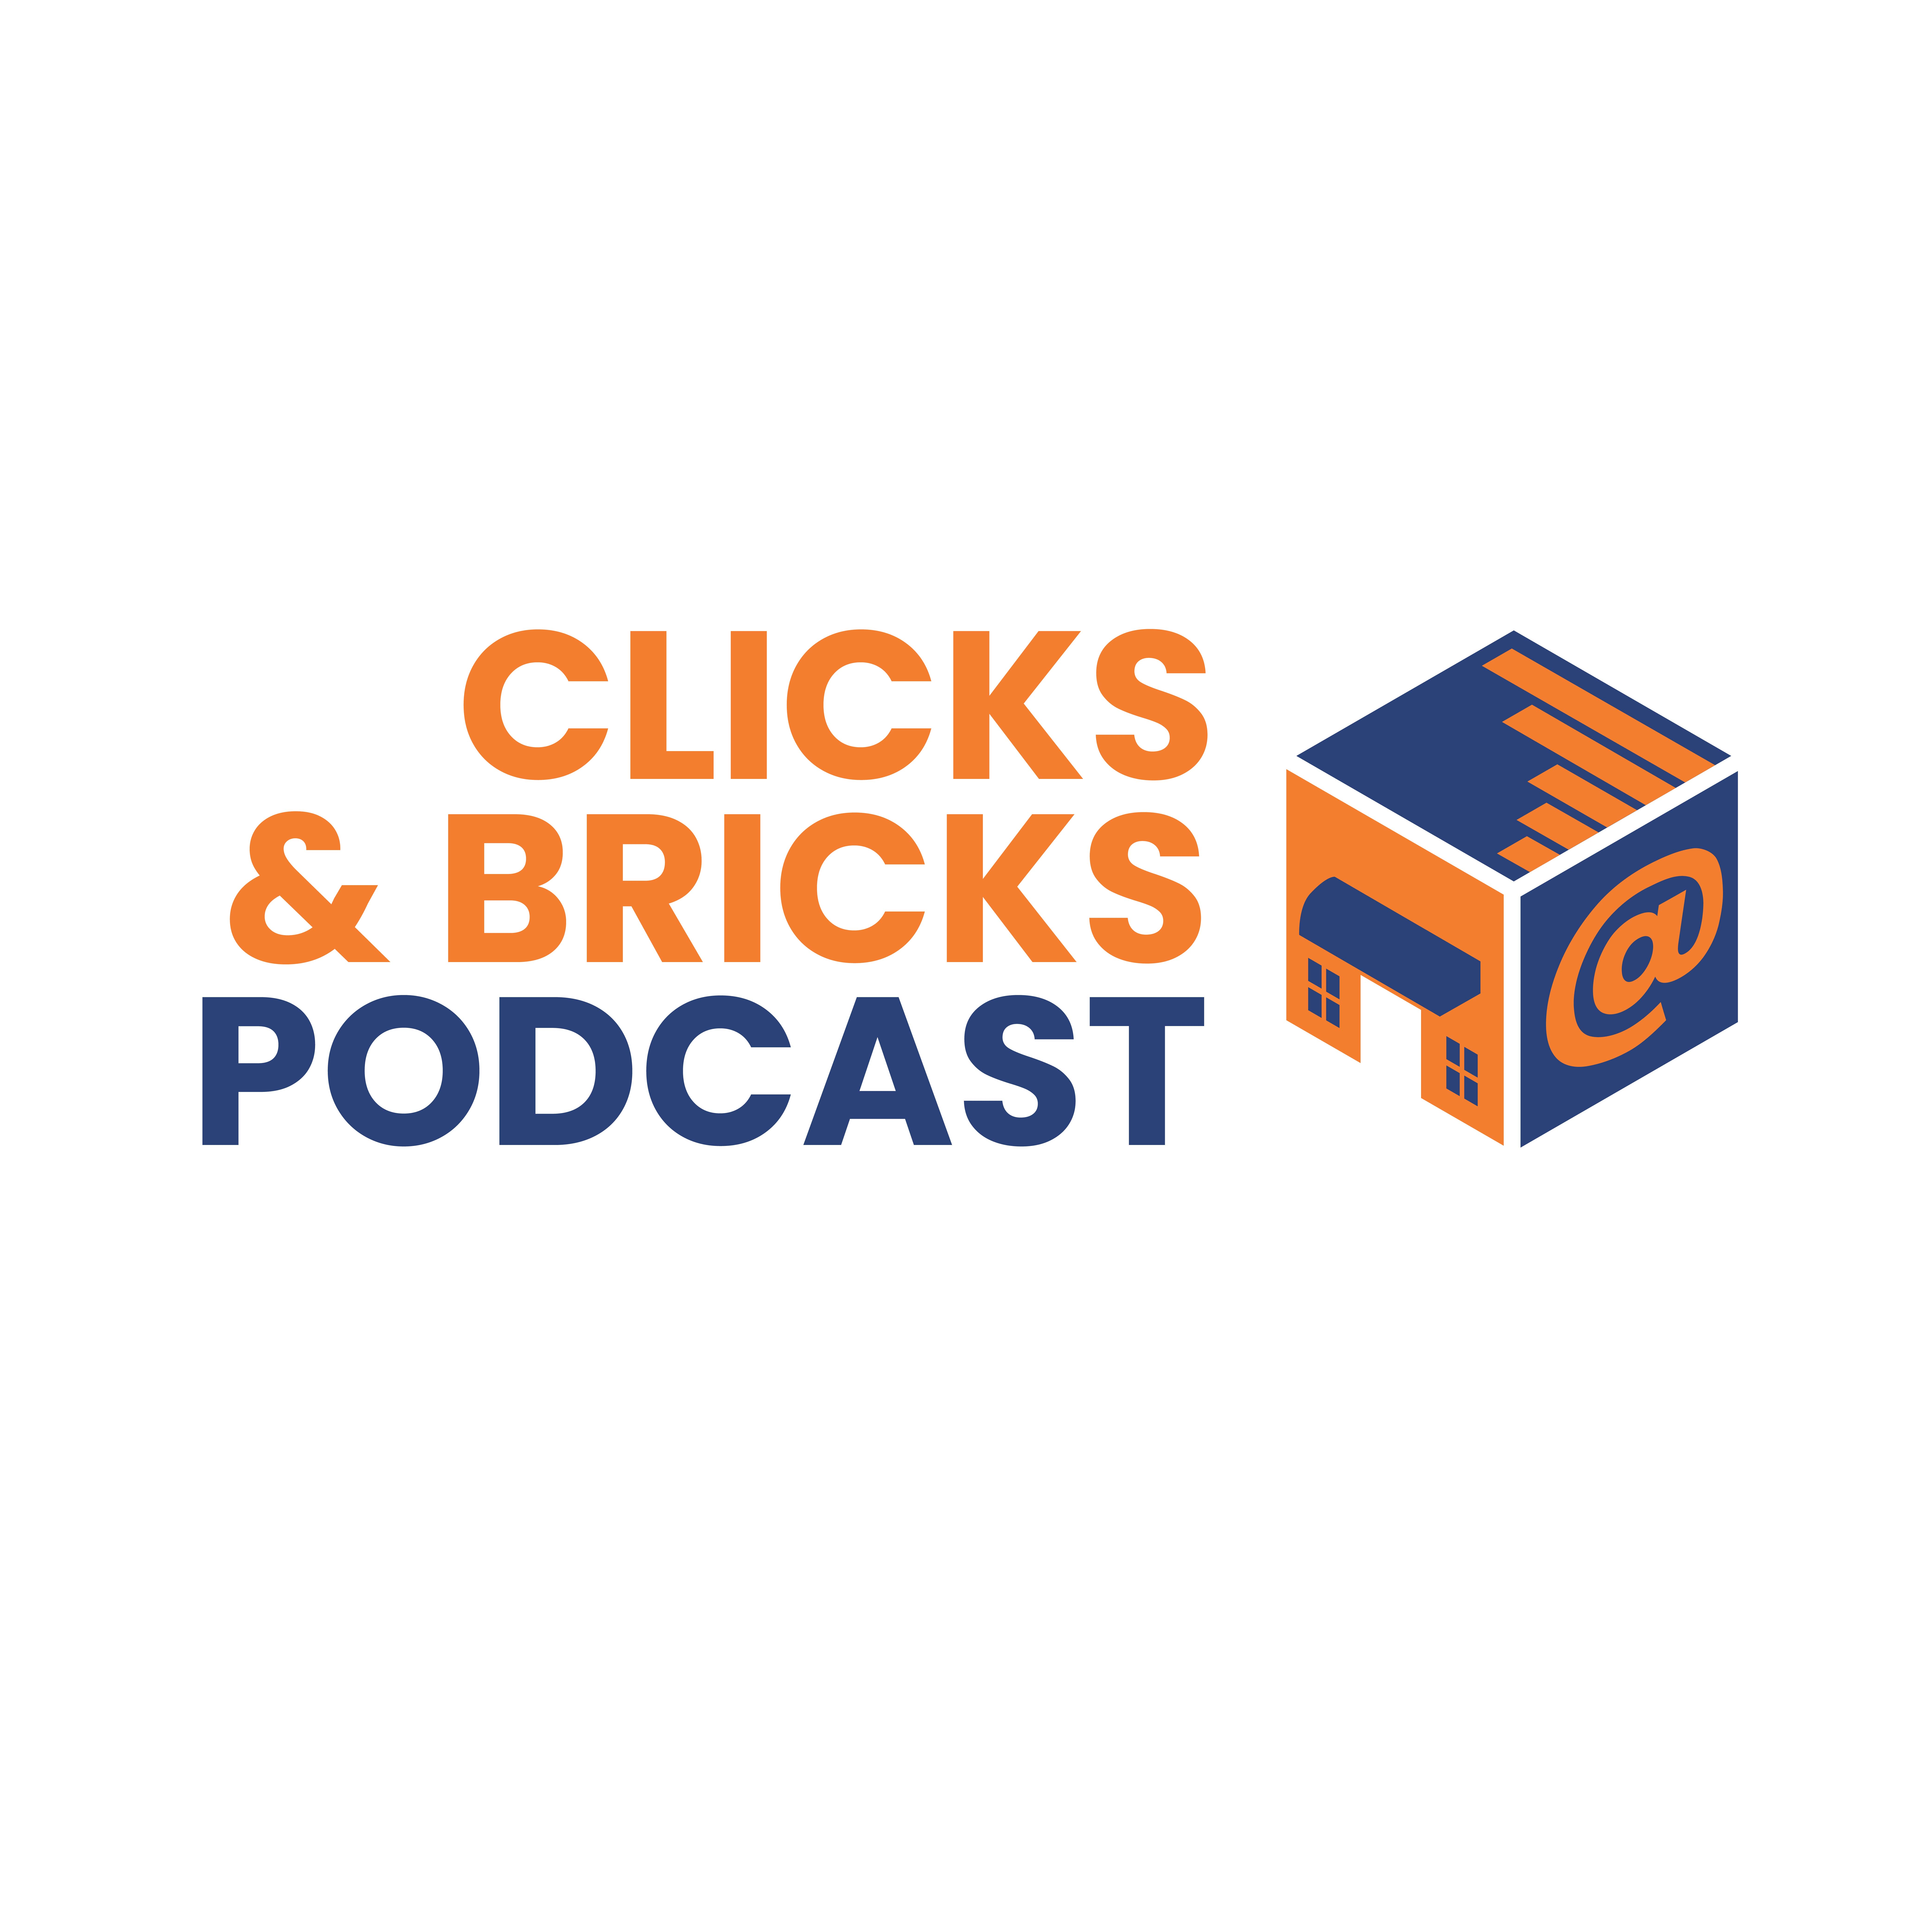 Nicole Spiegel-Gotsch of Mavyn Takes Center Stage at the Upcoming Clicks & Bricks Podcast